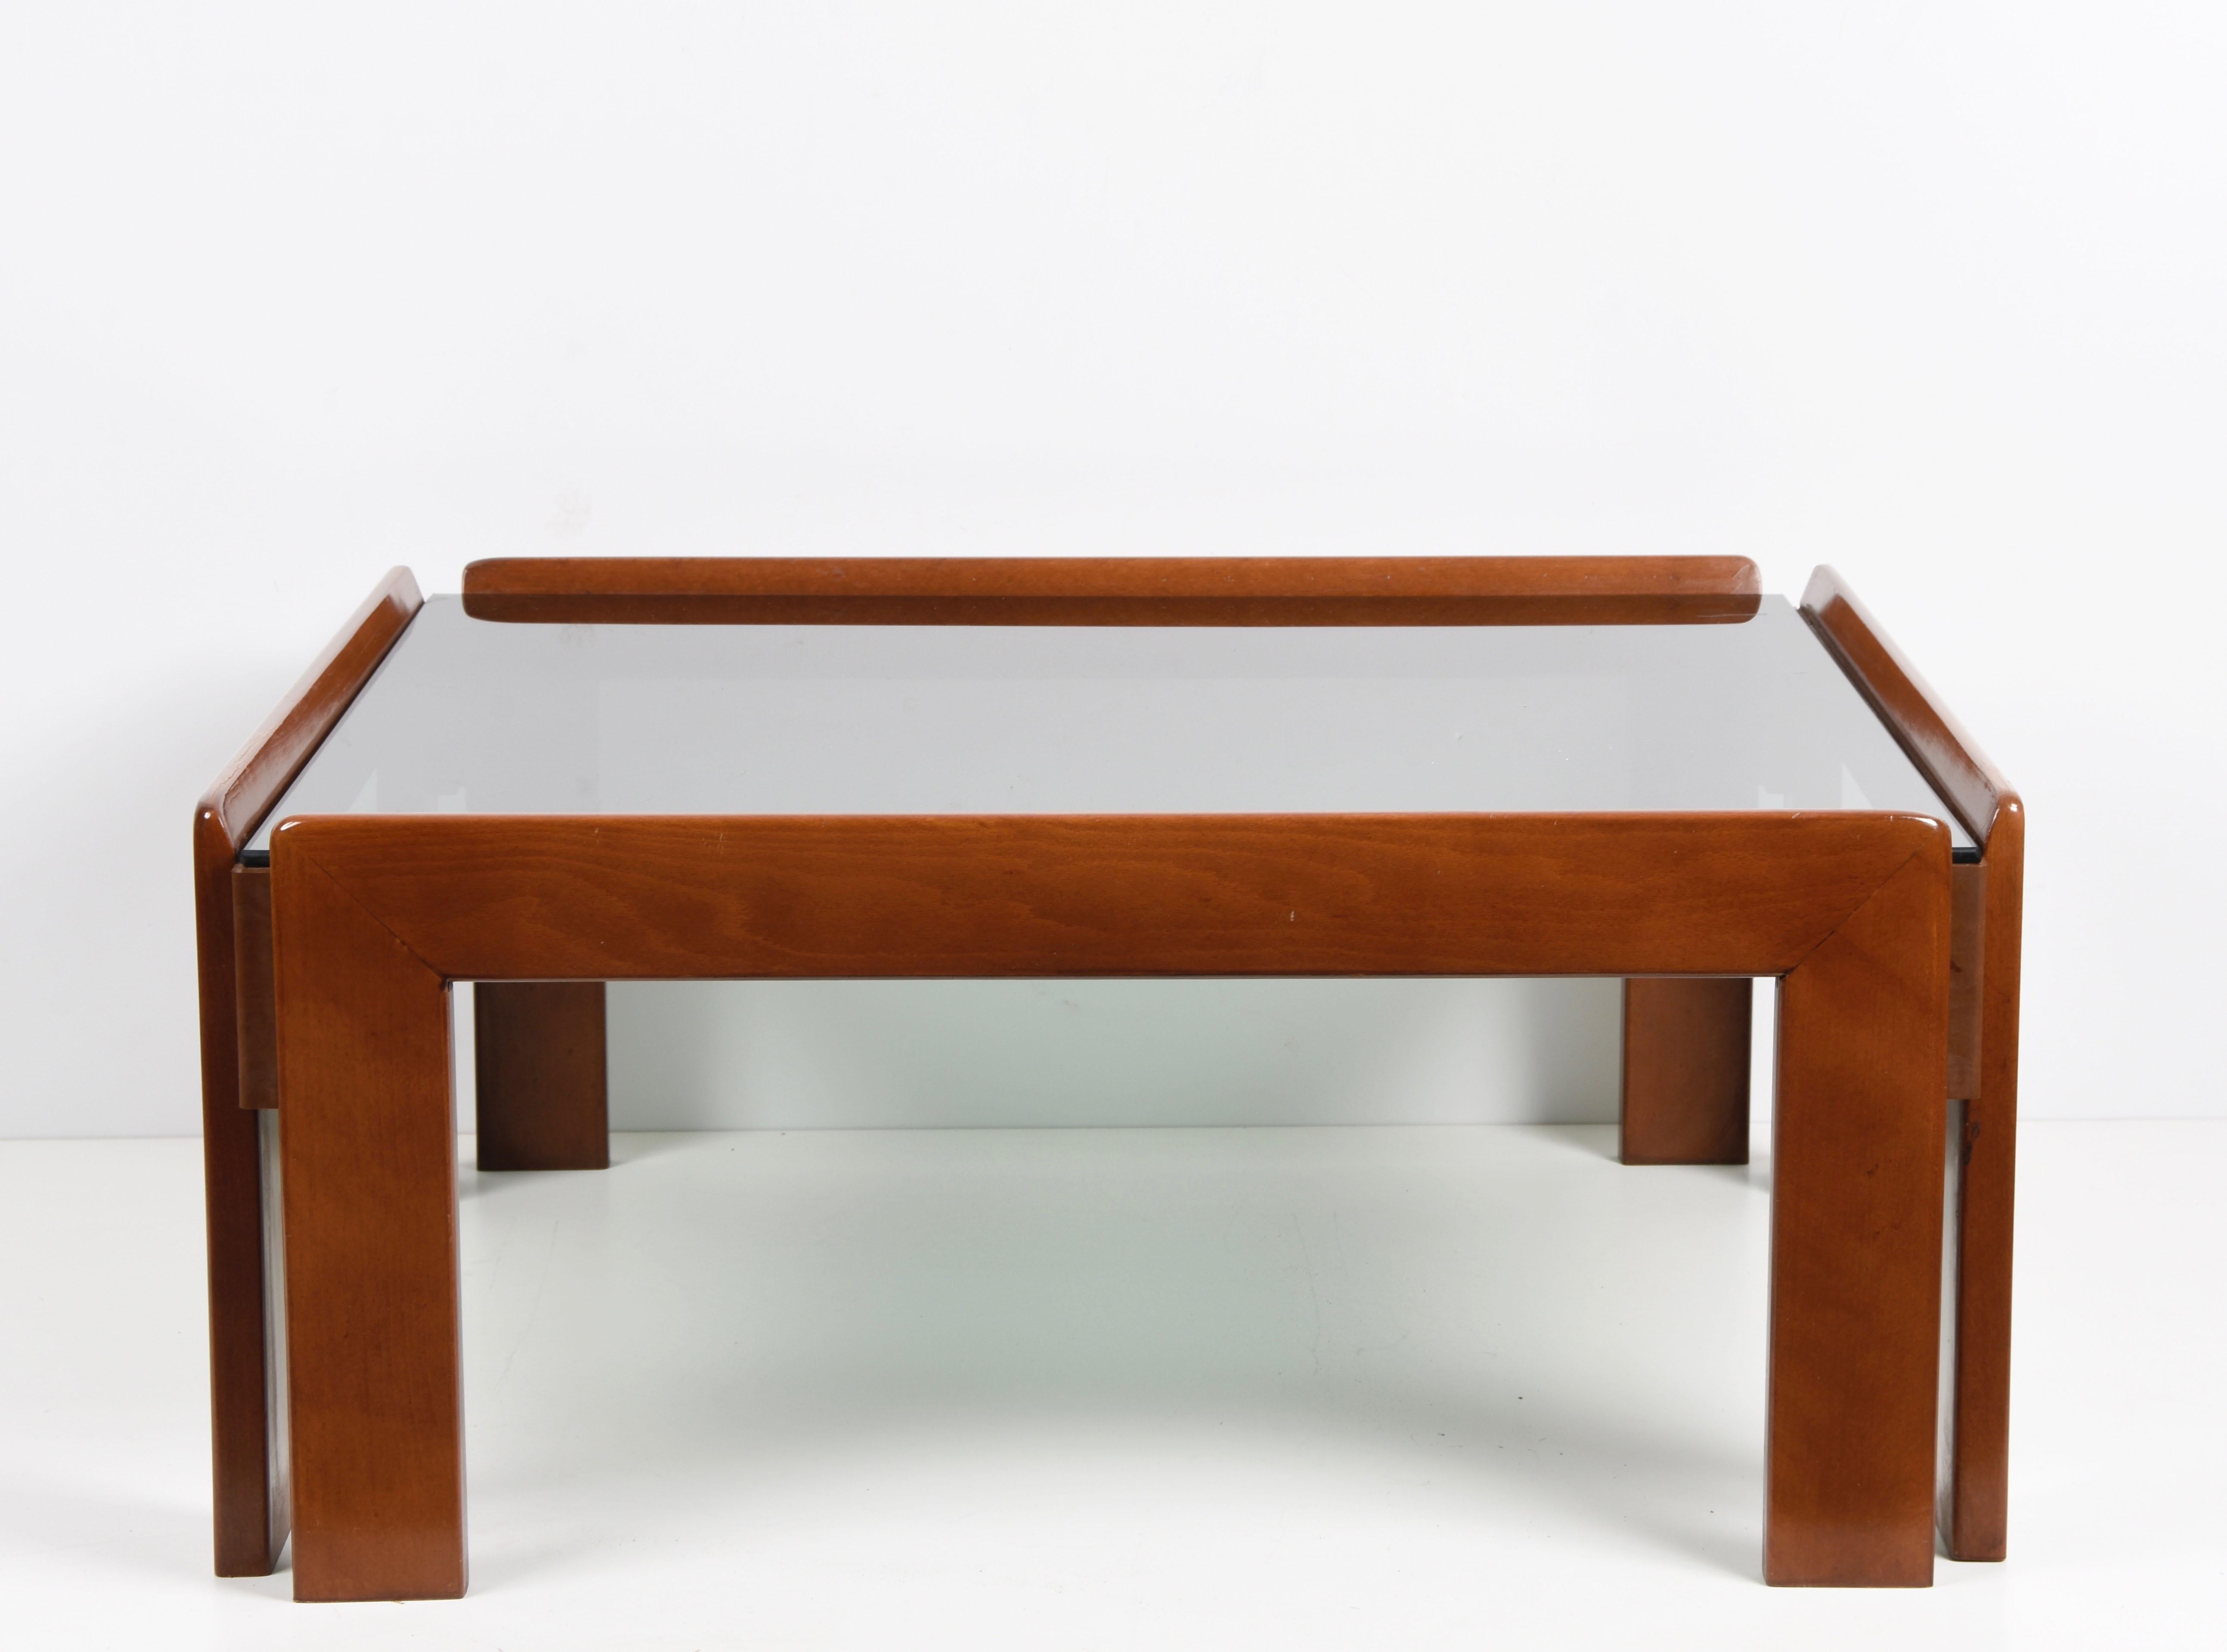 Midcentury incredible squared solid wood coffee table with smoked glass top. It was produced in Italy in the 1960s by Cassina and designed by Afra & Tobia Scarpa.

You are going to love the clean lines and the presence of the dark-toned, smoked